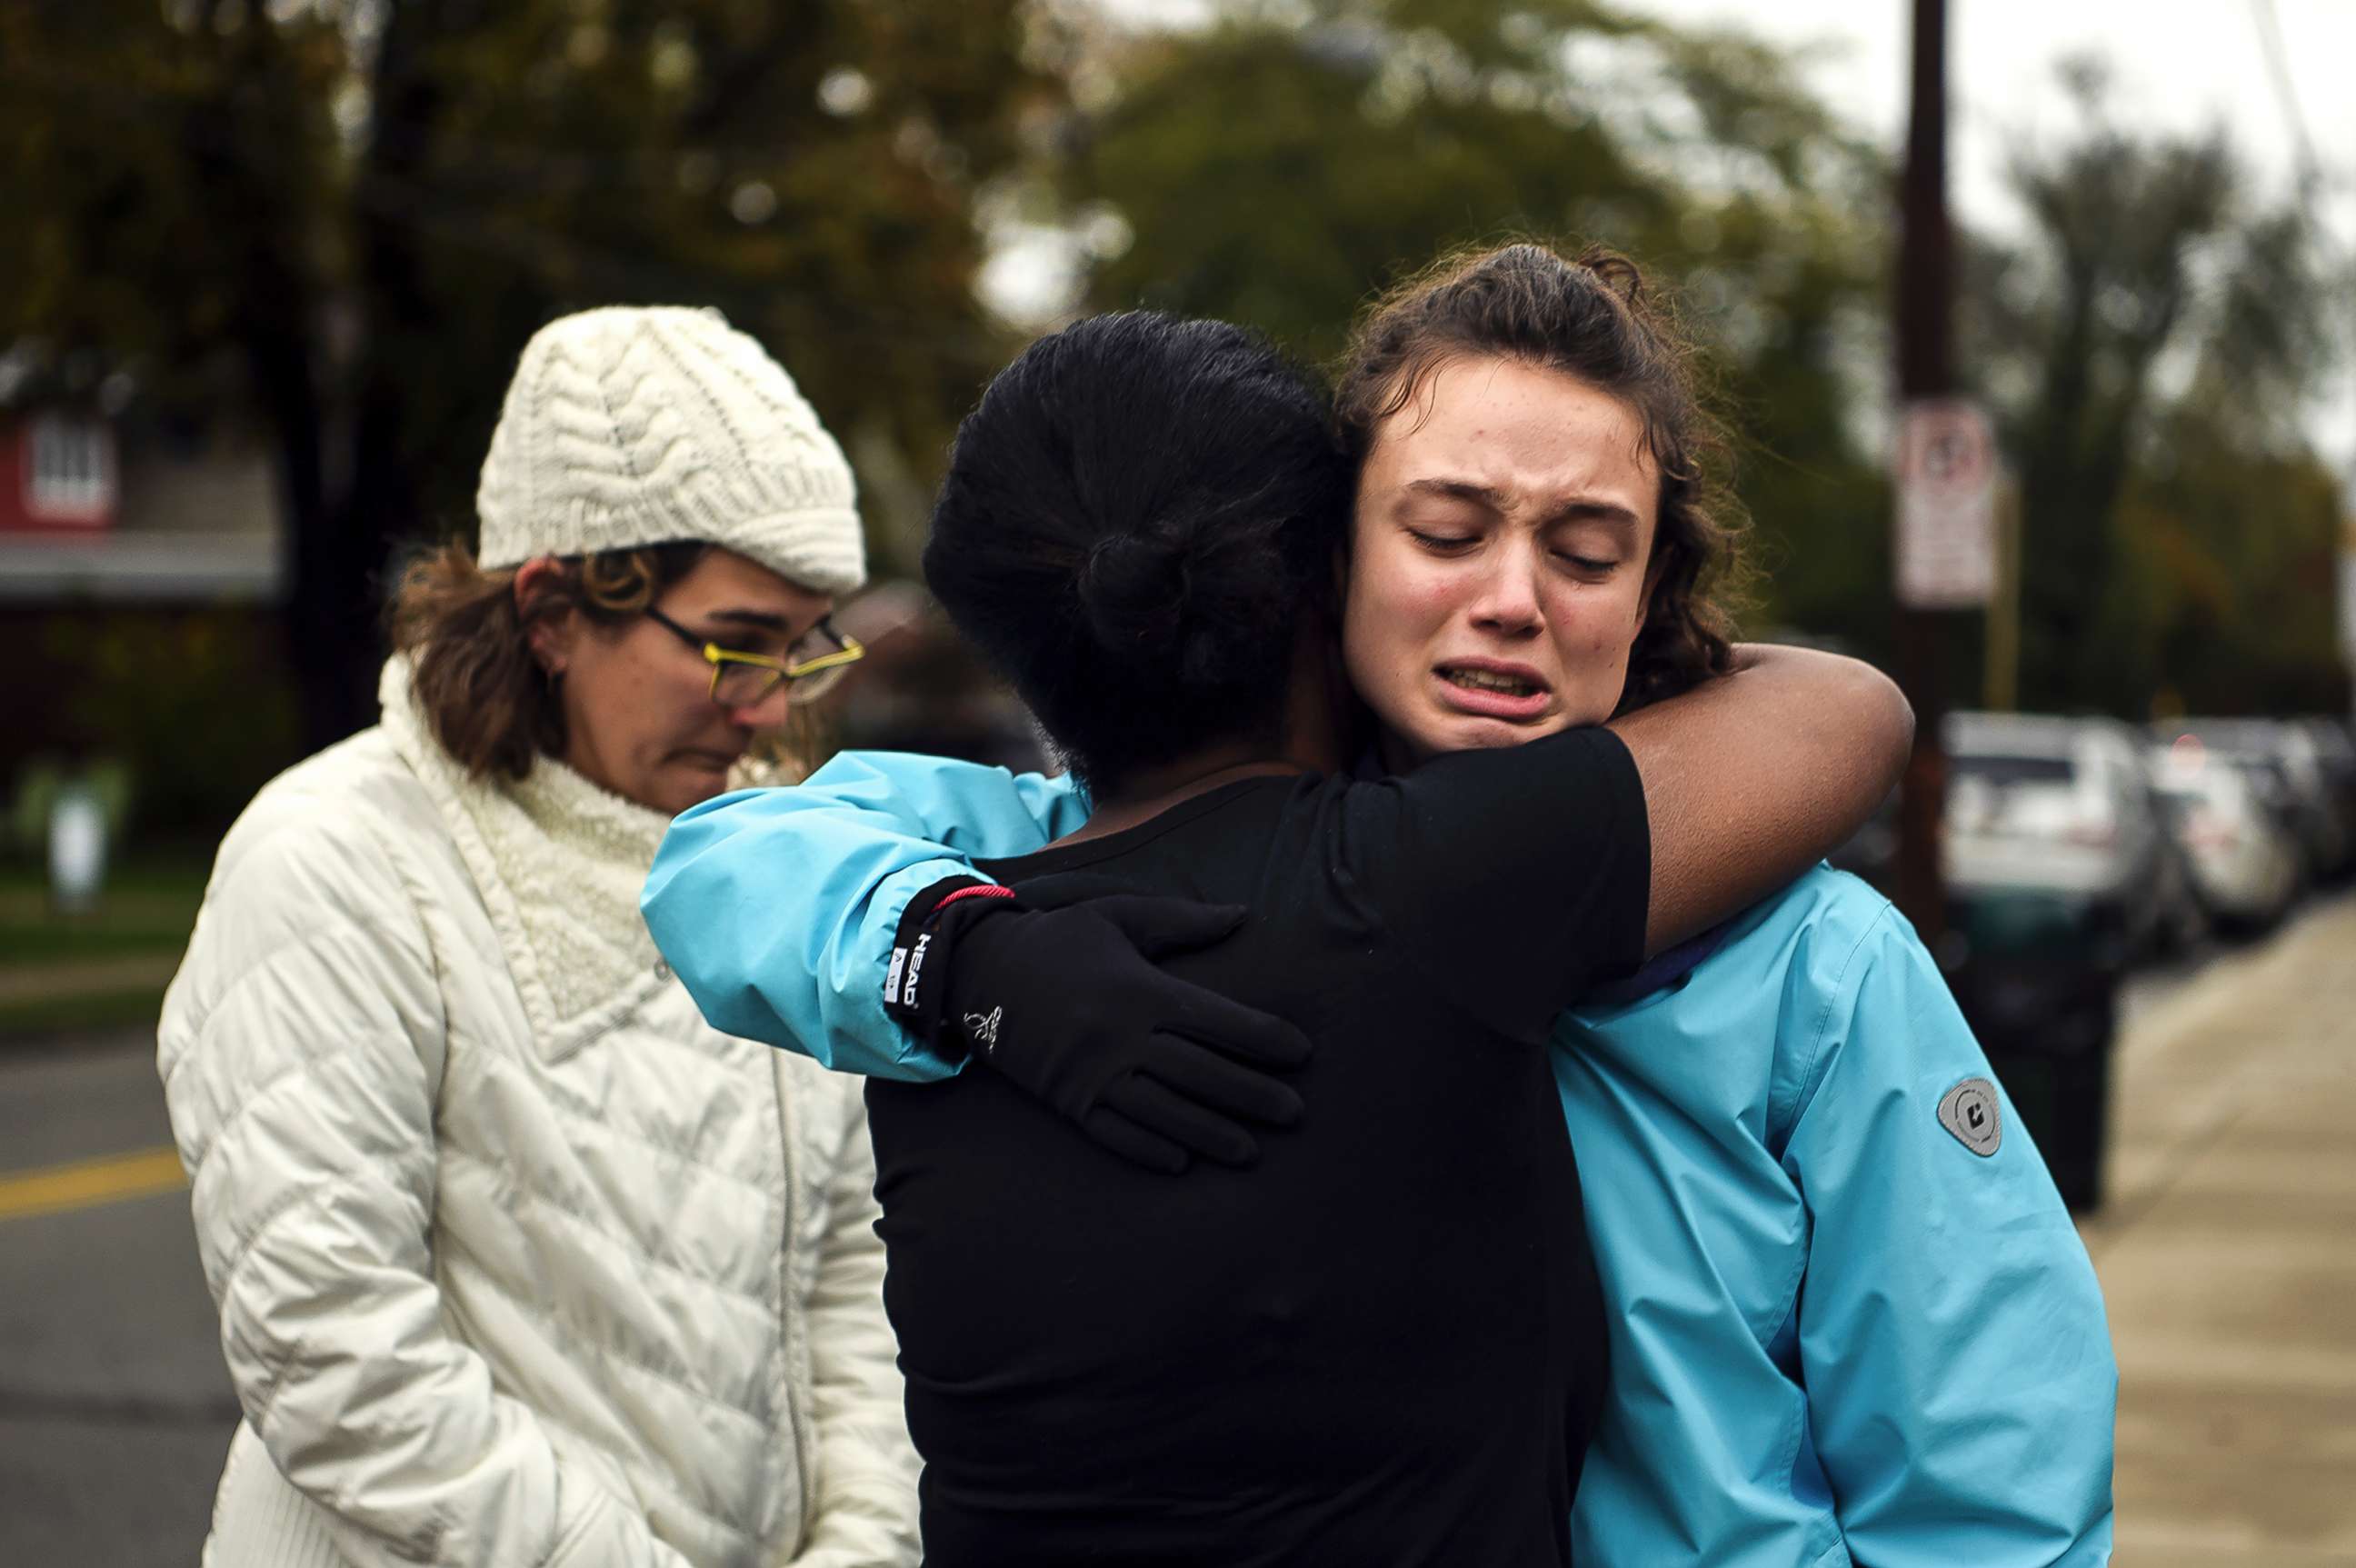 PHOTO: From left, Kate Rothstein looks on as Tammy Hepps hugs Simone Rothstein, after multiple people were shot at The Tree of Life Congregation synagogue, Oct, 27, 2018, in Pittsburgh.